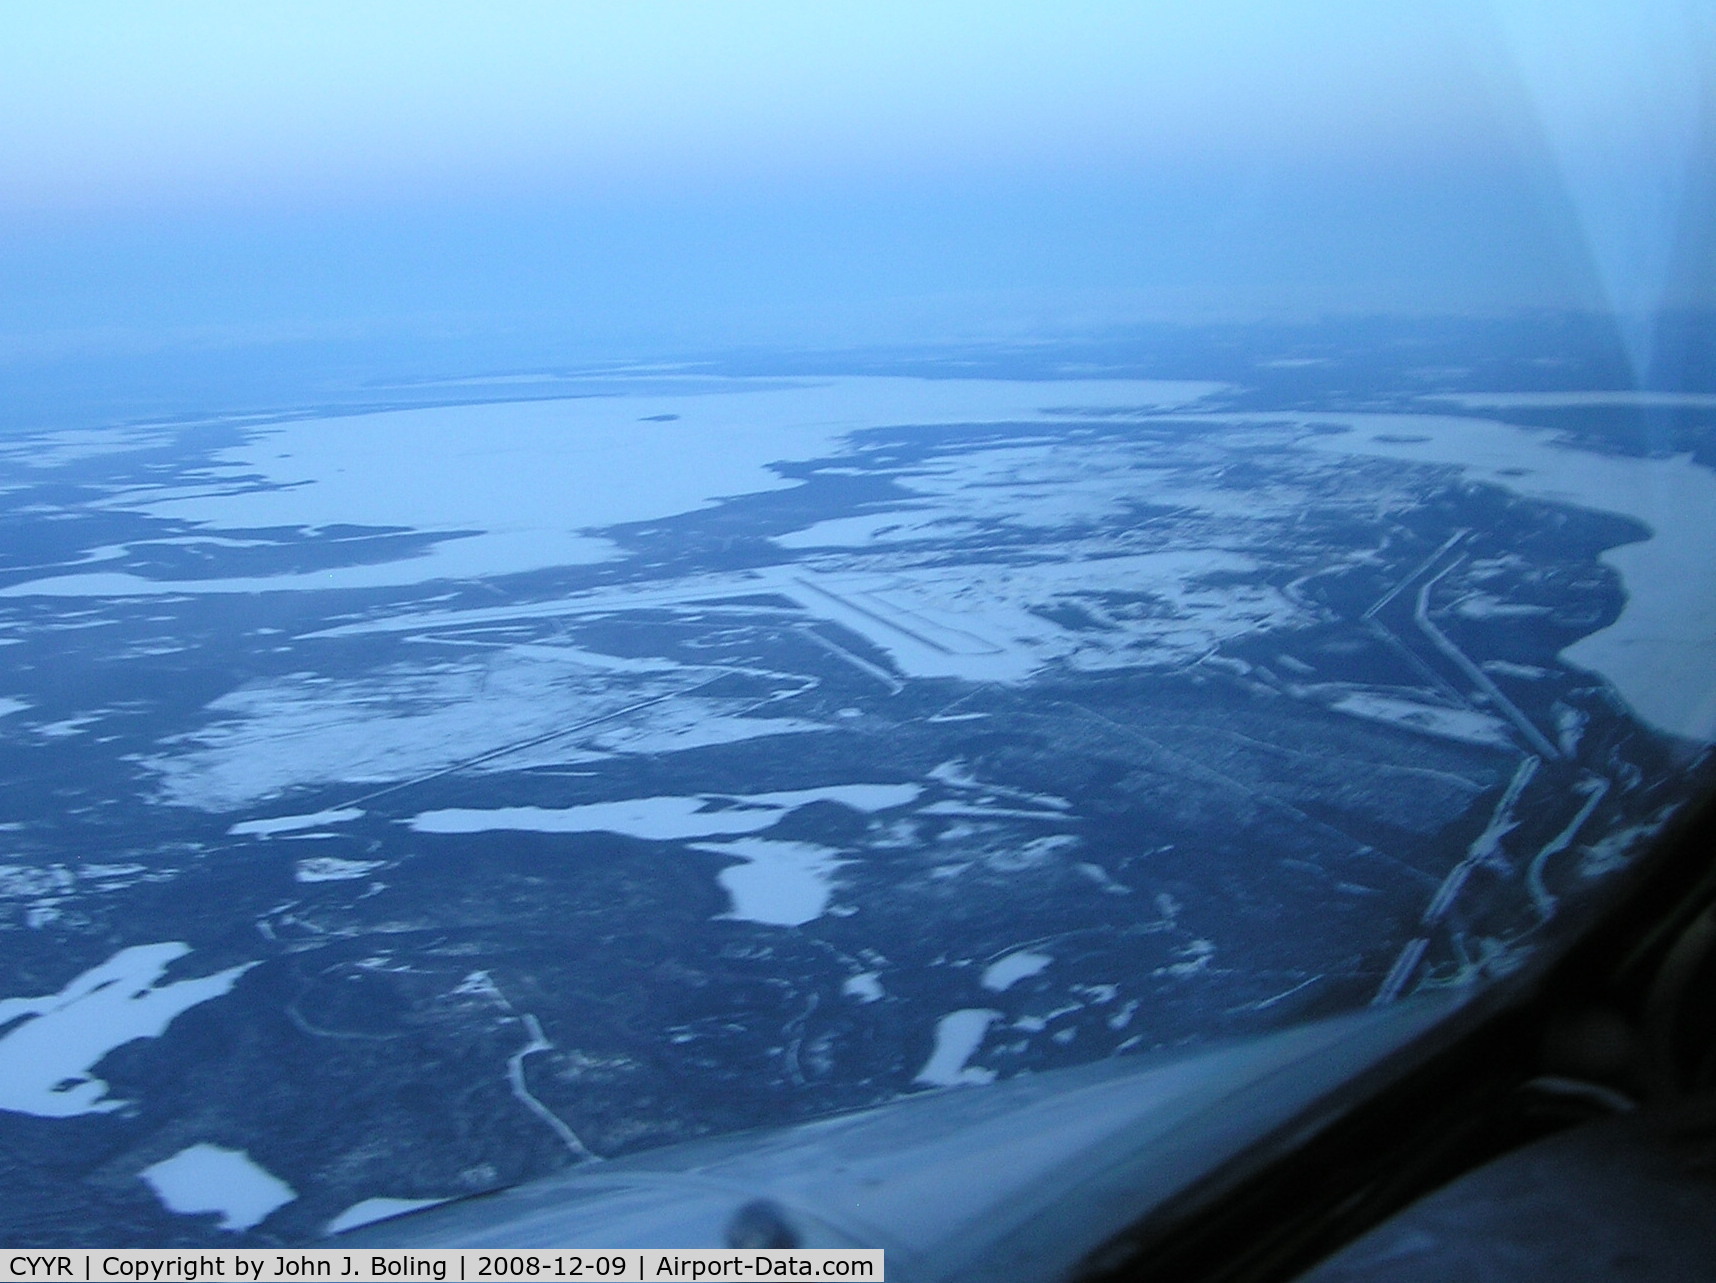 CFB Goose Bay (Goose Bay Airport), Happy Valley-Goose Bay, Newfoundland and Labrador Canada (CYYR) - Goose Bay looking East on a cold winter day.